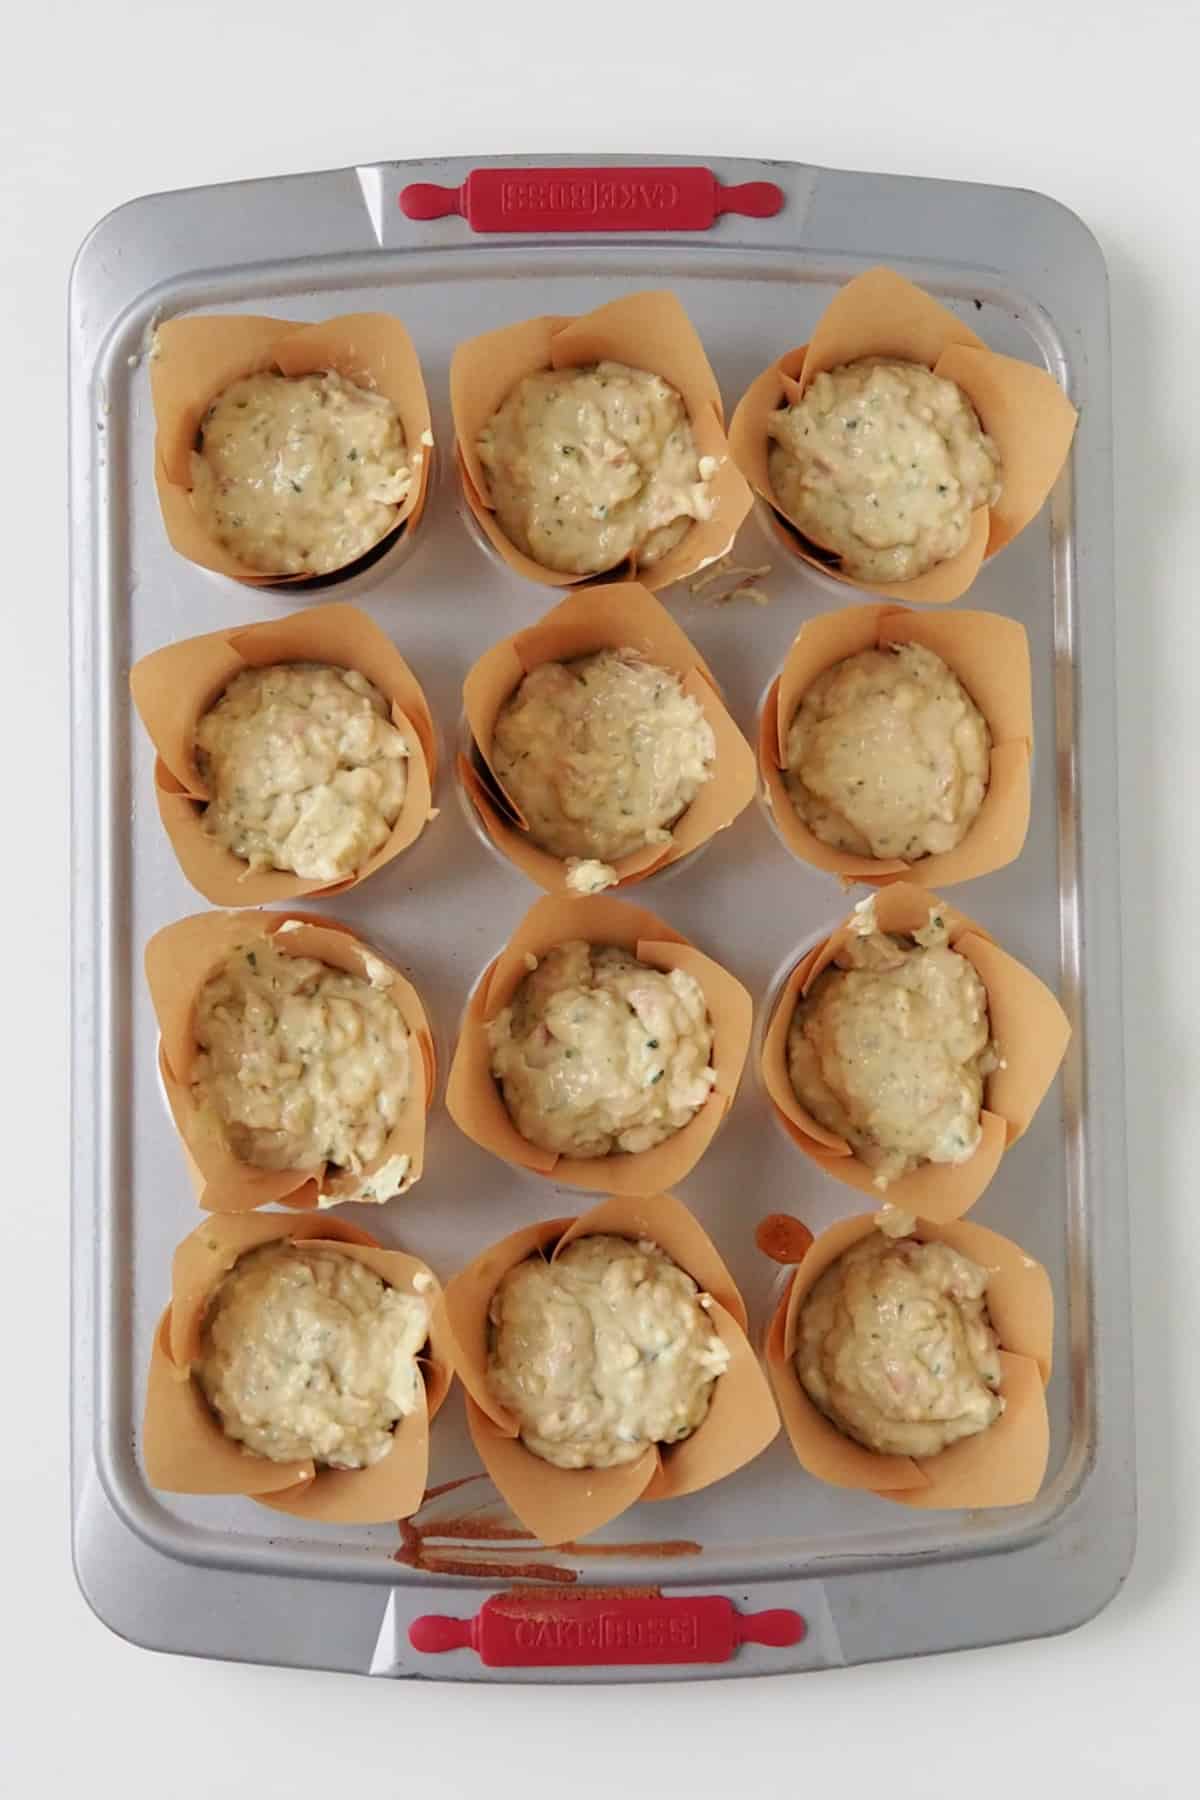 Savoury muffin mixture in paper cases in a muffin tray ready to go into the oven.